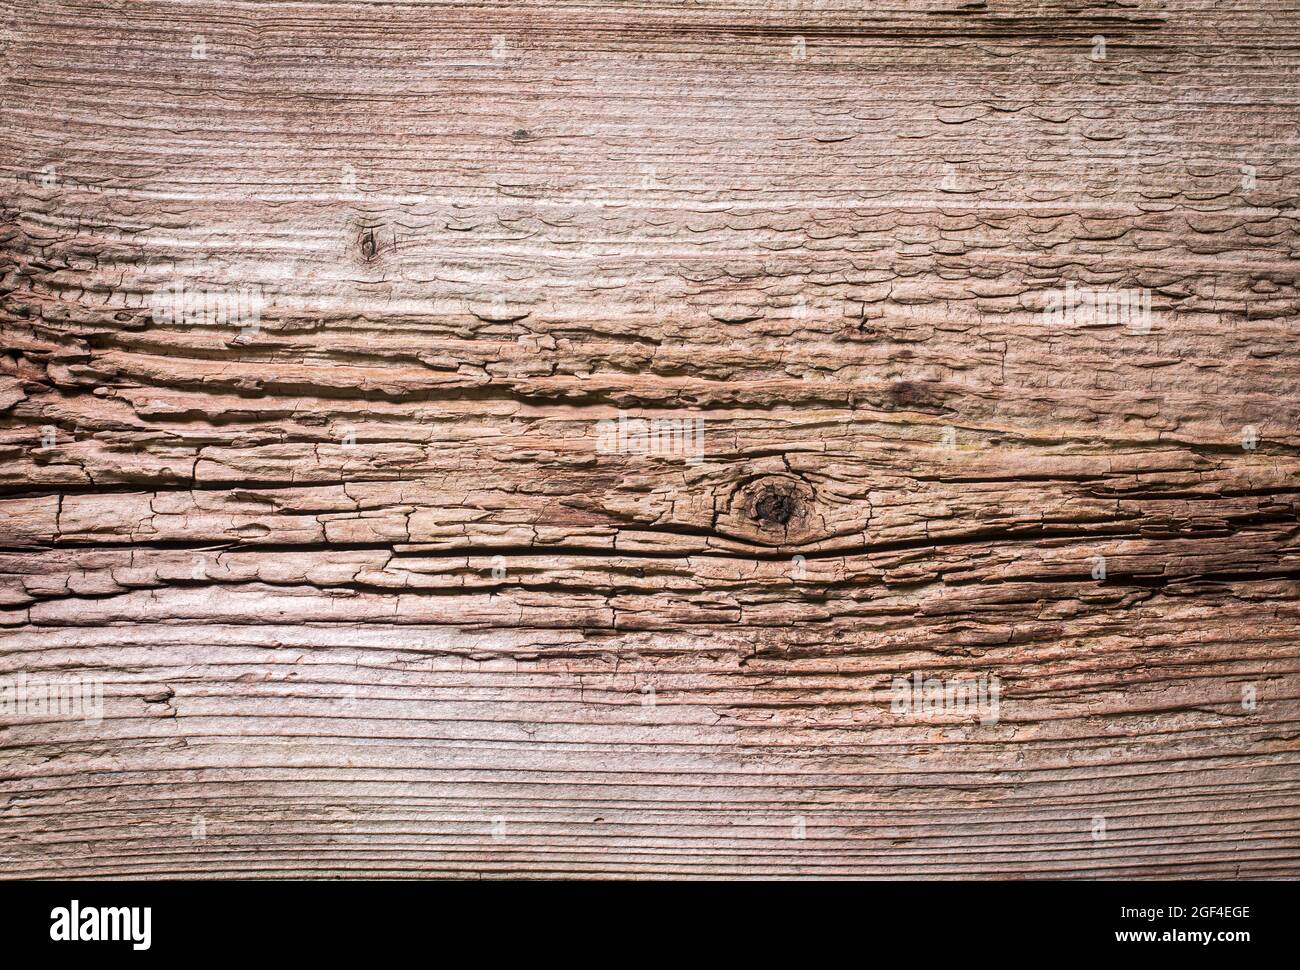 old textured wood material close up Stock Photo